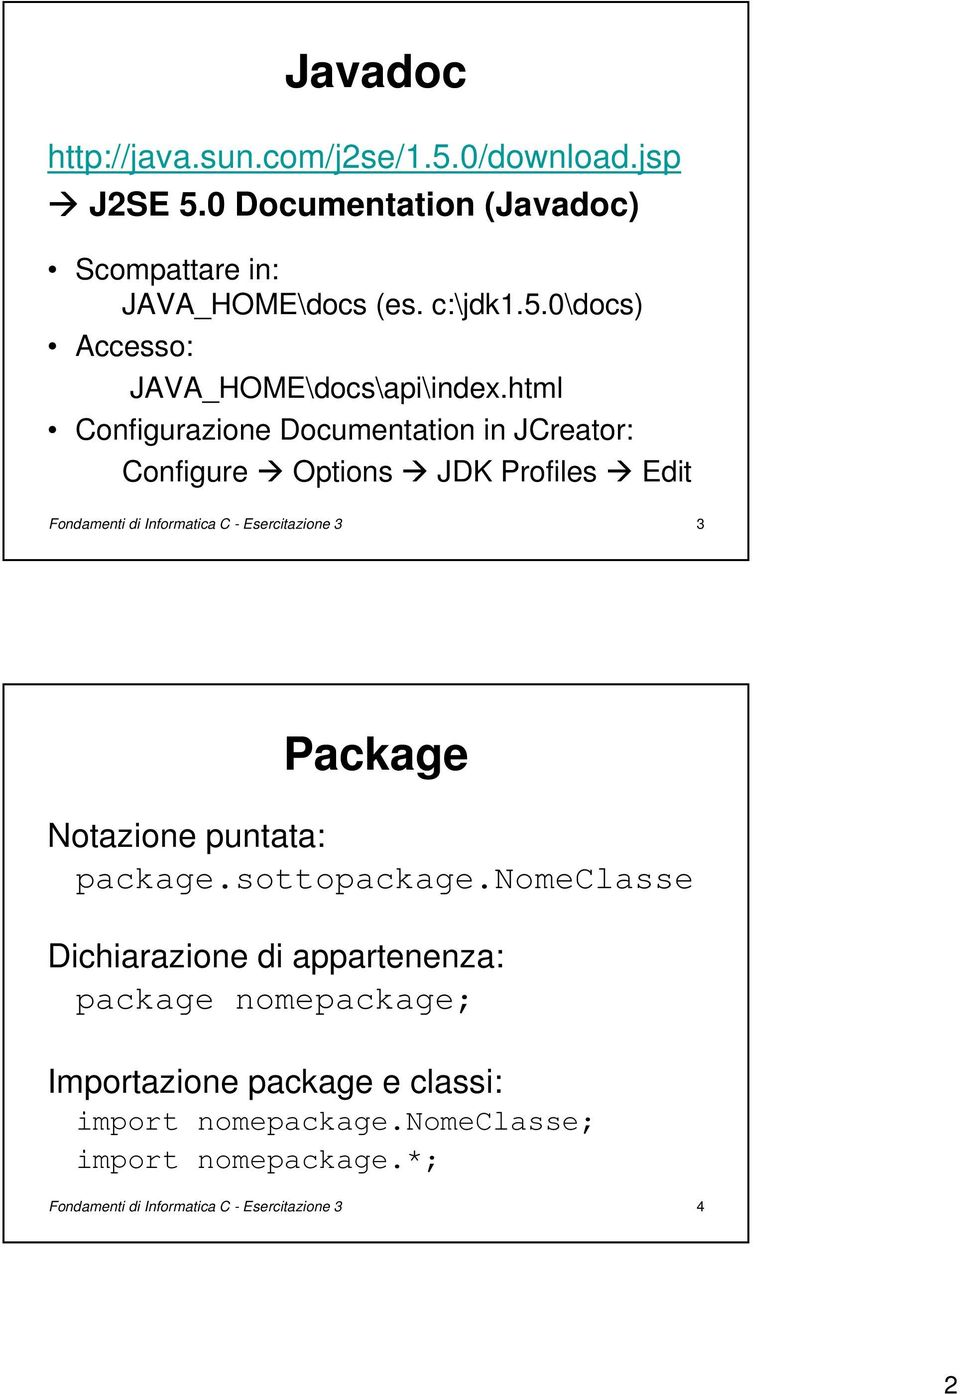 Package Notazione puntata: package.sottopackage.